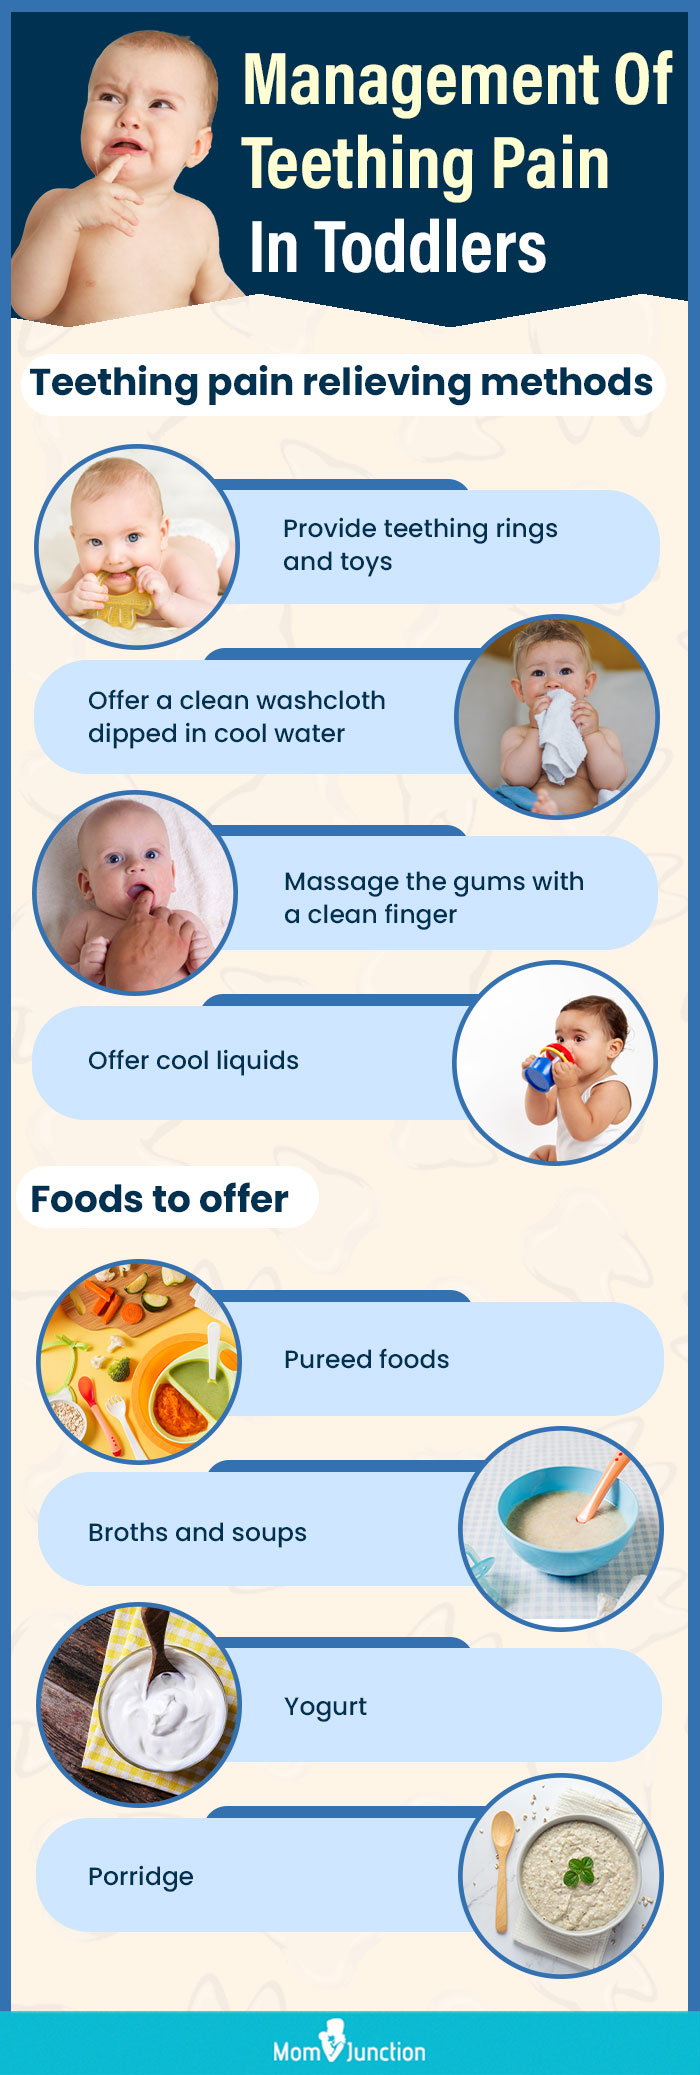 management of teething pain in toddlers (infographic)